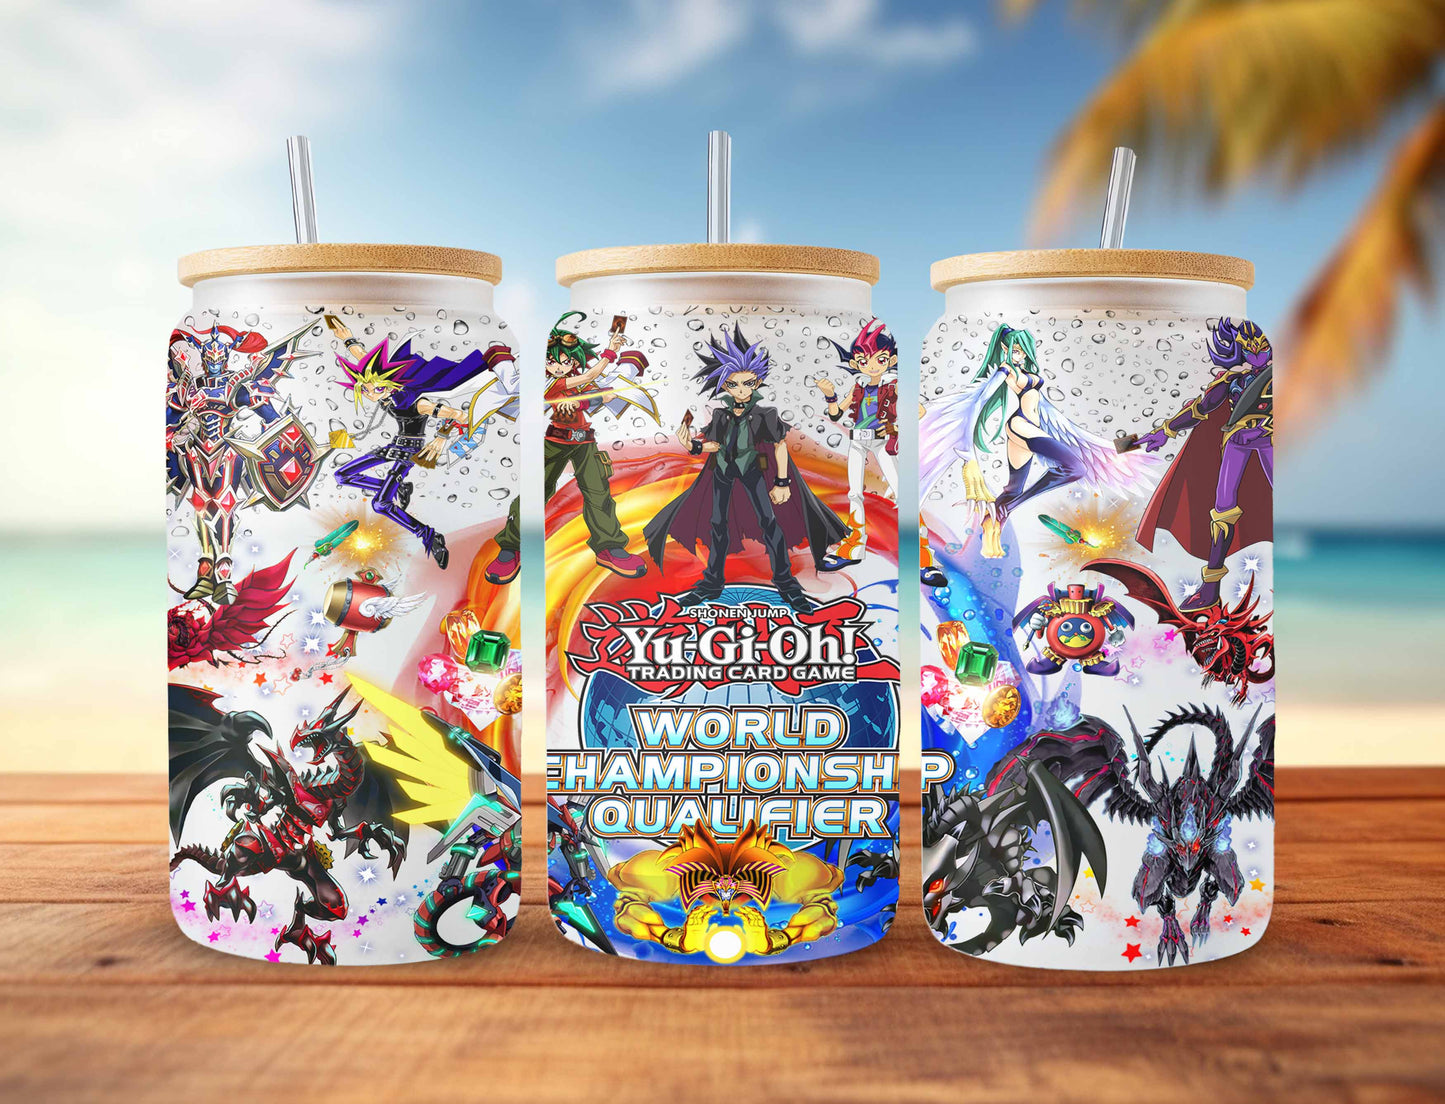 Yu Gi Oh! Duel Monsters Glass Can,16oz Can Glass,16oz PNG, Duel Monsters Glass Can Digital Design, Movie Skinny 16oz Design, Instant Download